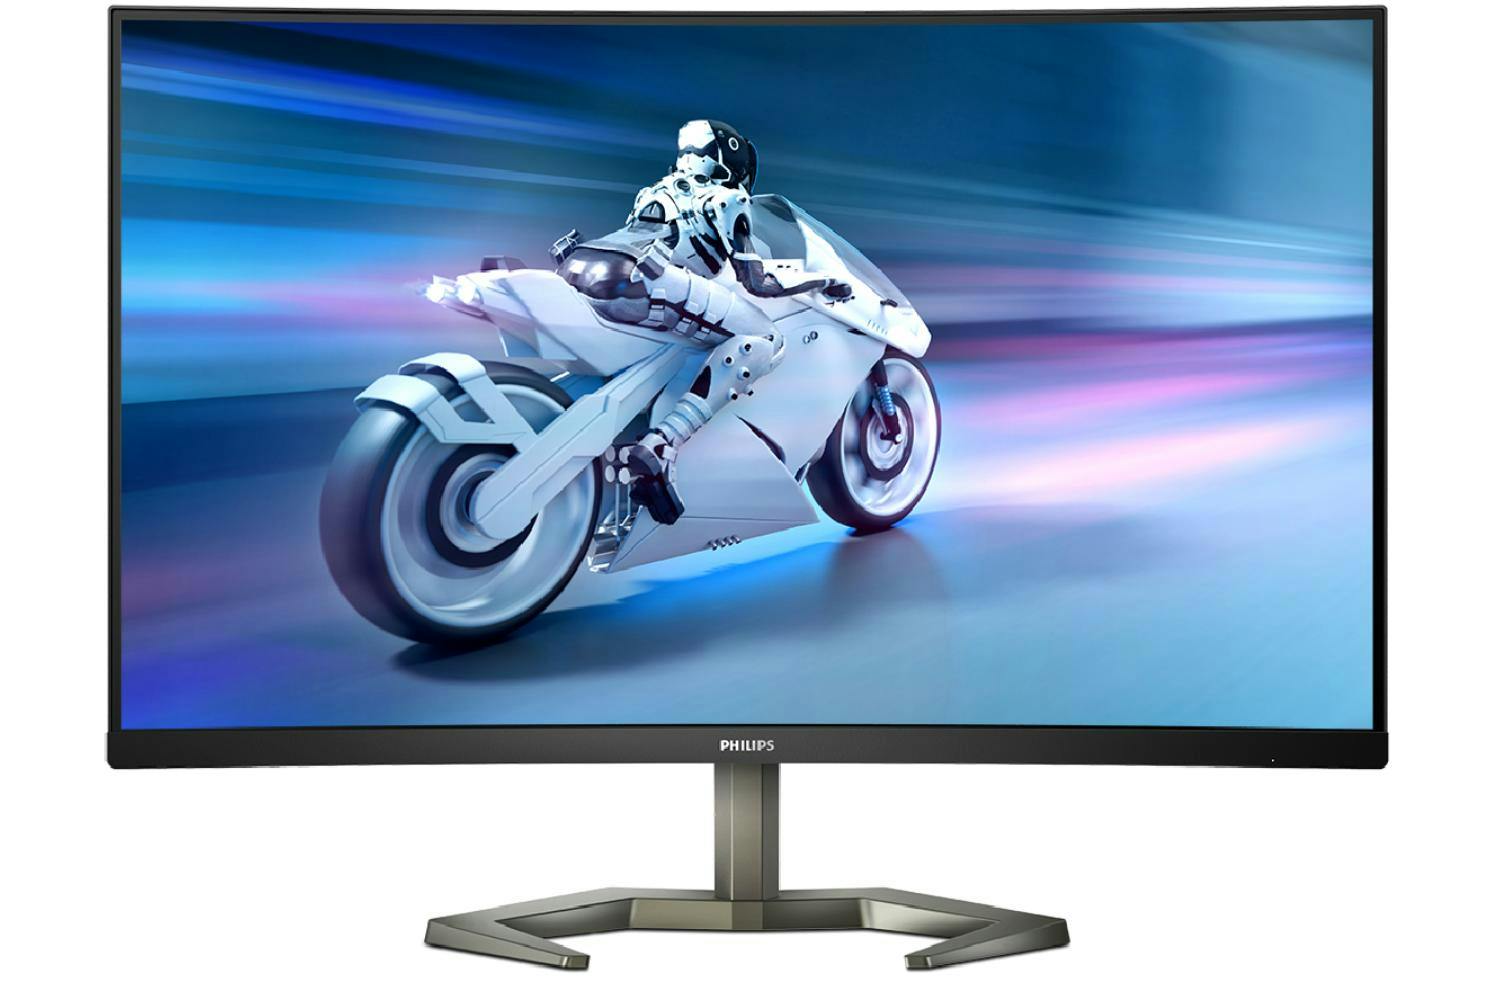 Philips Evnia 5000 Curved 31.5" FHD Gaming Monitor | 32M1C5200W/00